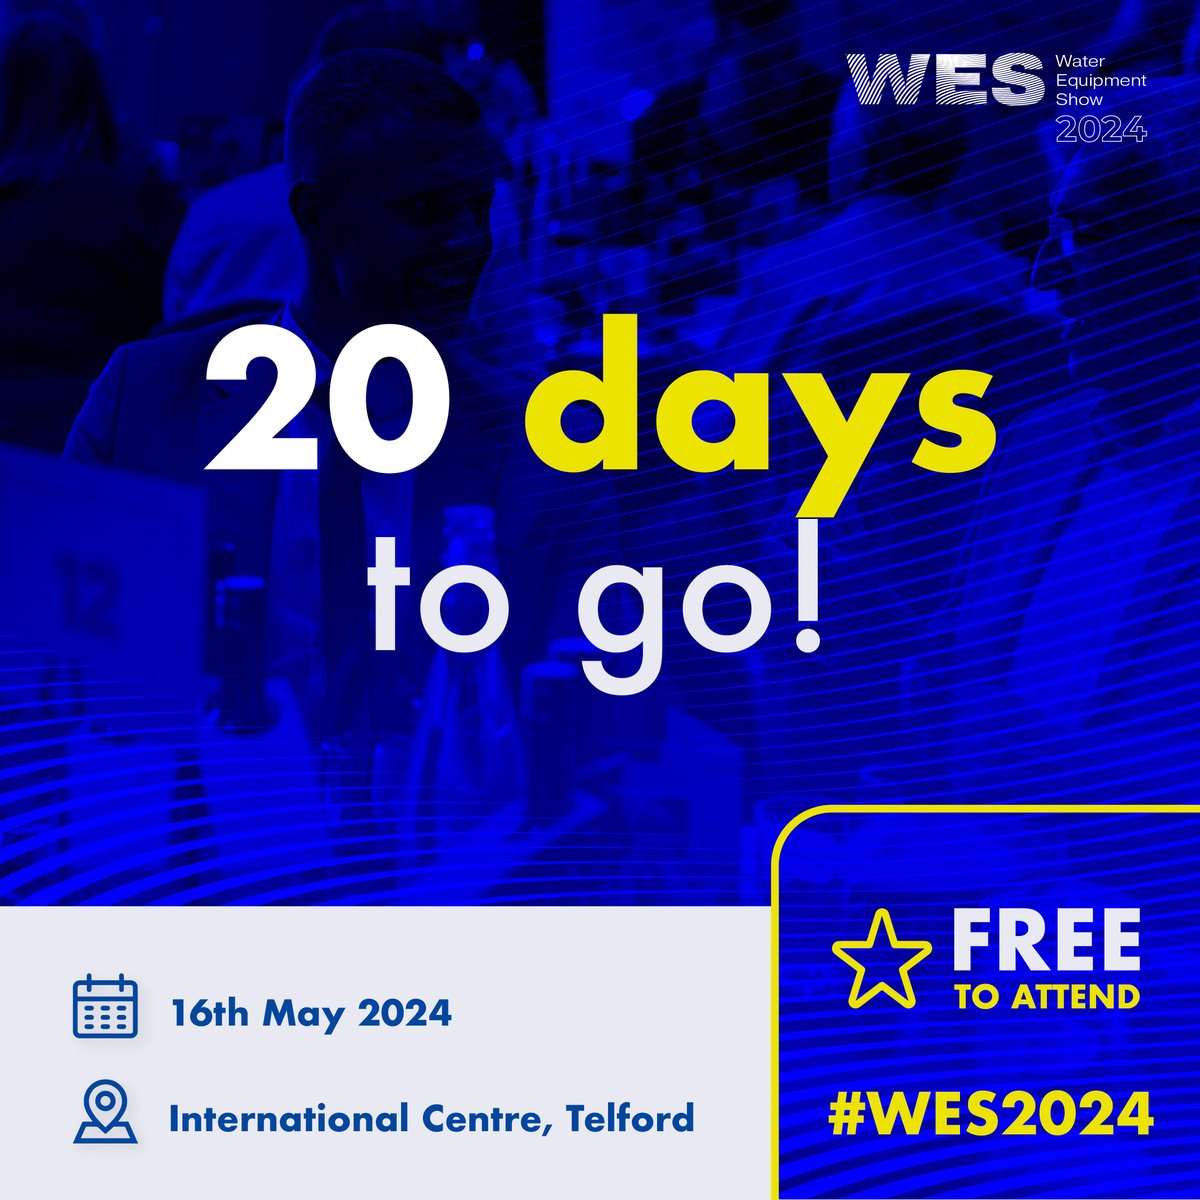 The Water Equipment Show is just 20 days away, so time is running out to secure your place. Don't miss out!

Register now: bit.ly/WES24_Register…

#WES2024 #NetworkingEvent #BusinessExpo